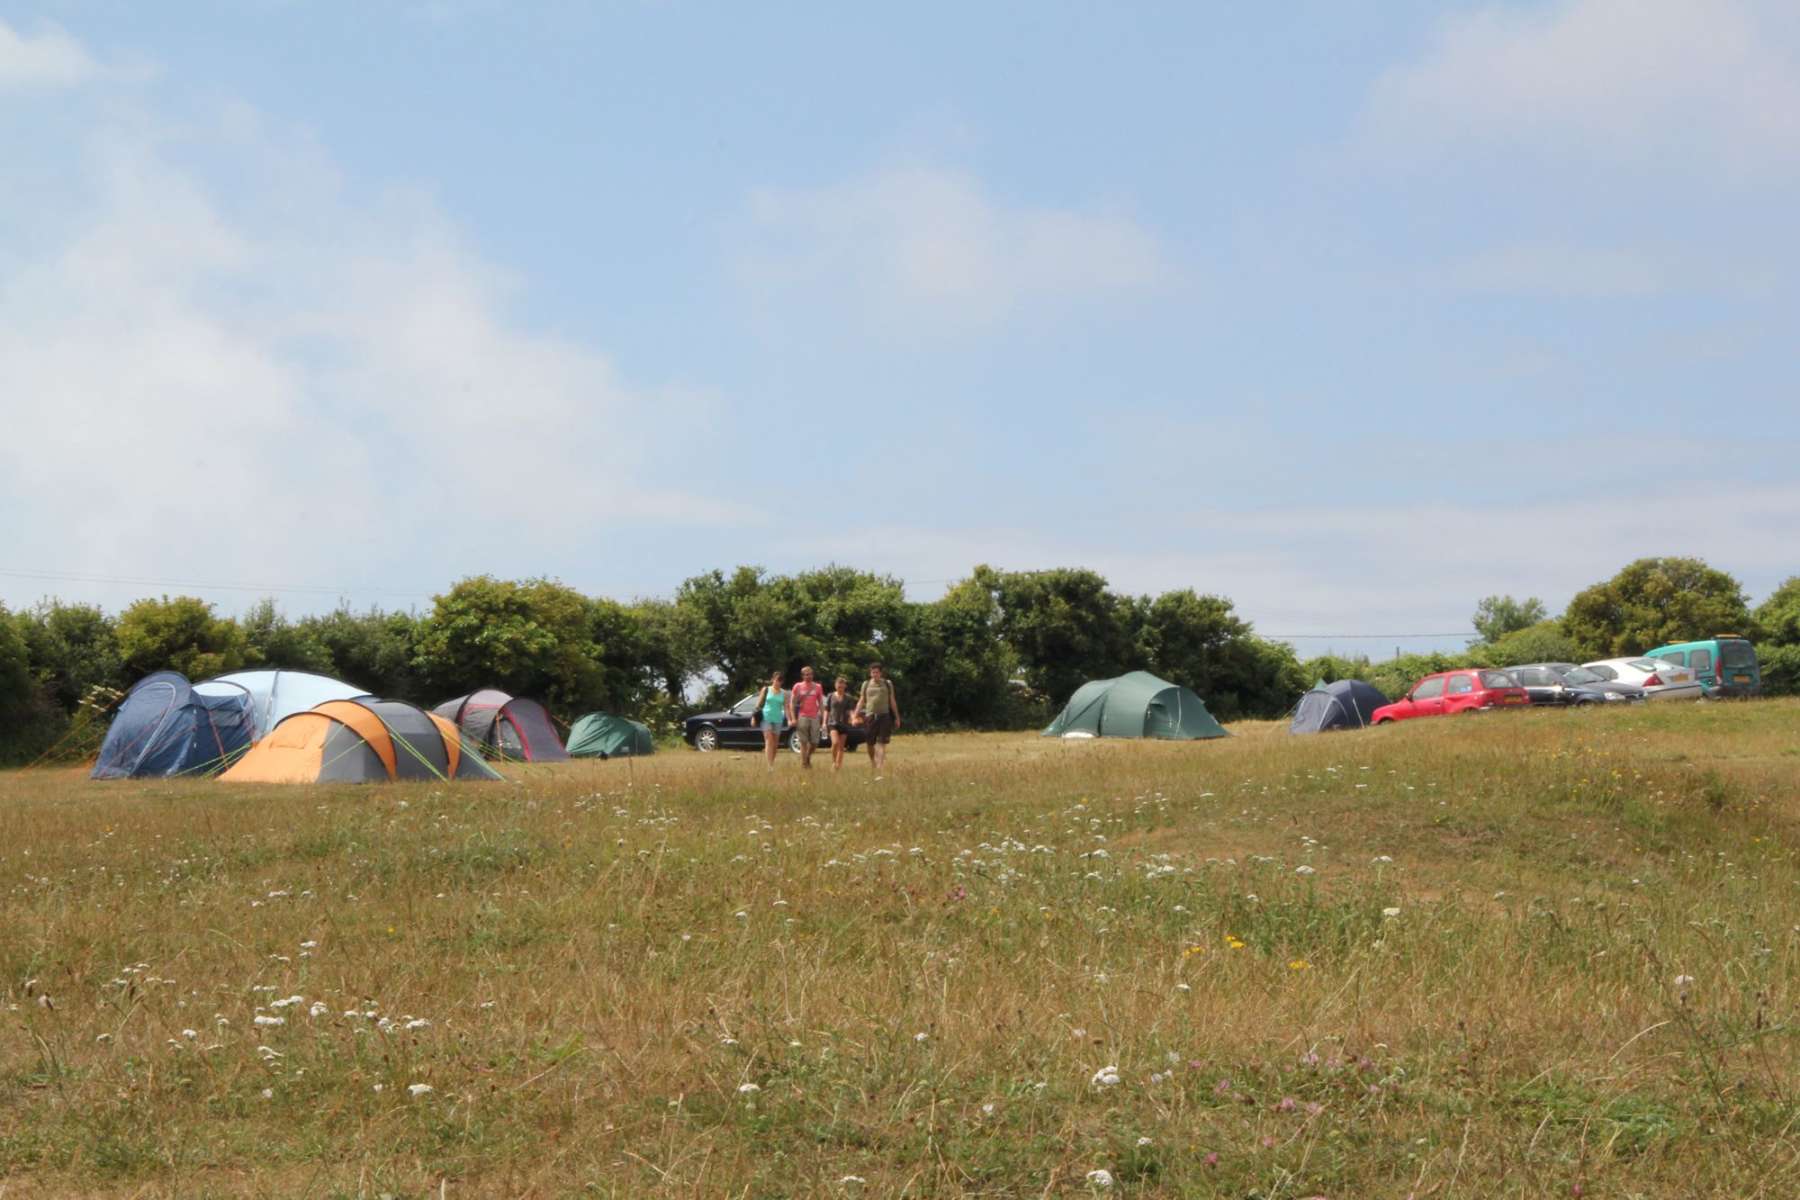 Acton Field - Hipcamp in Dorset, England